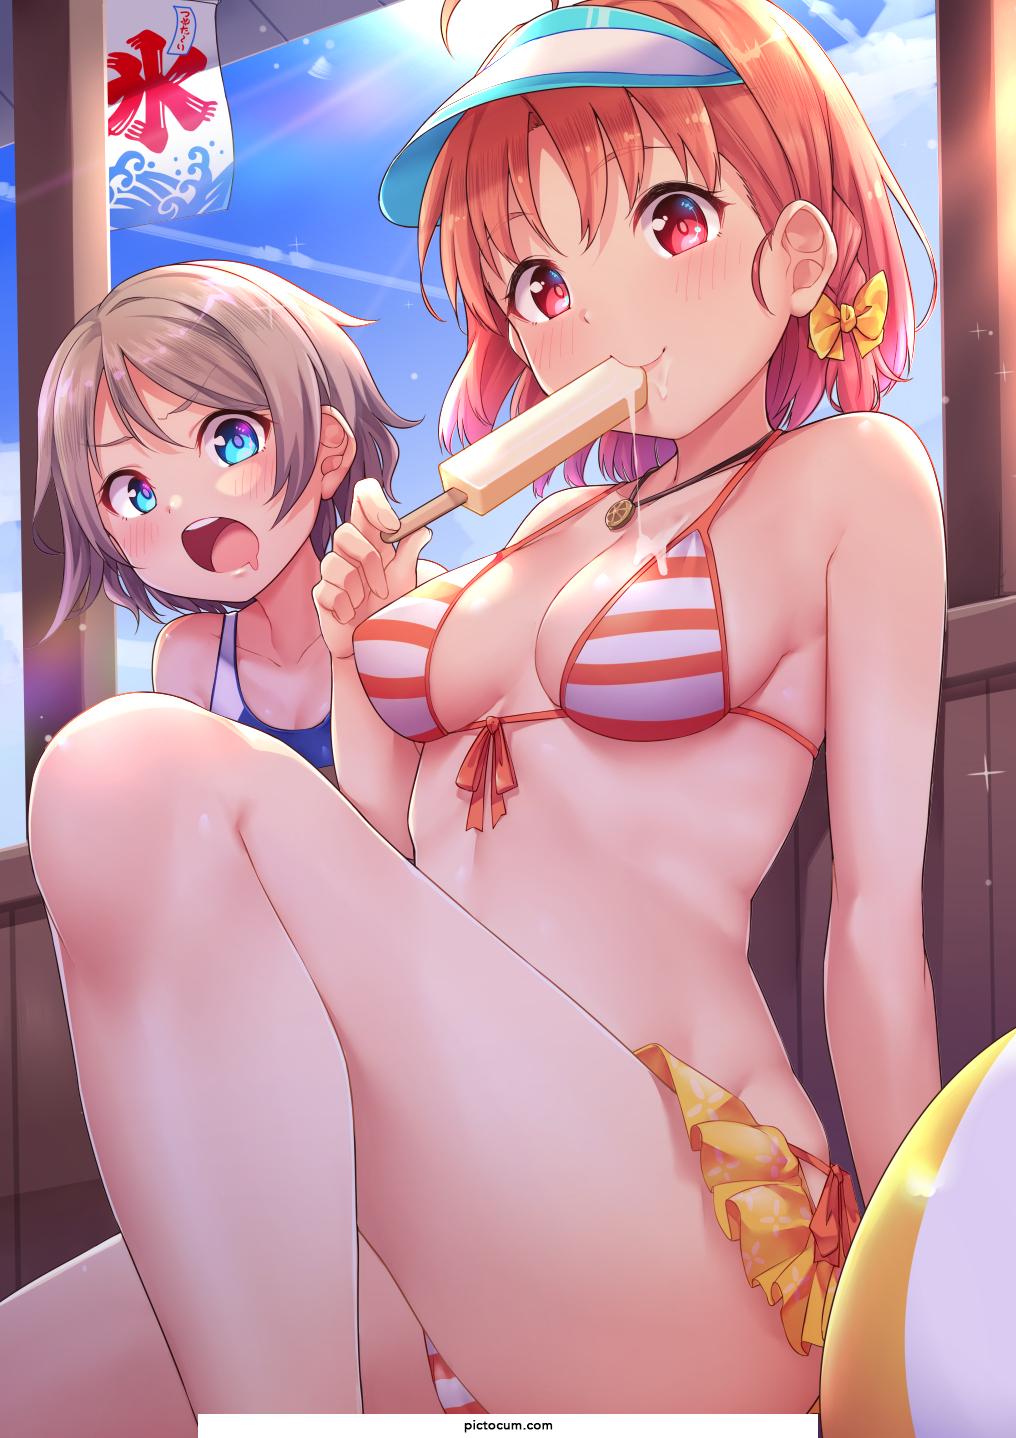 You and Chika at beach